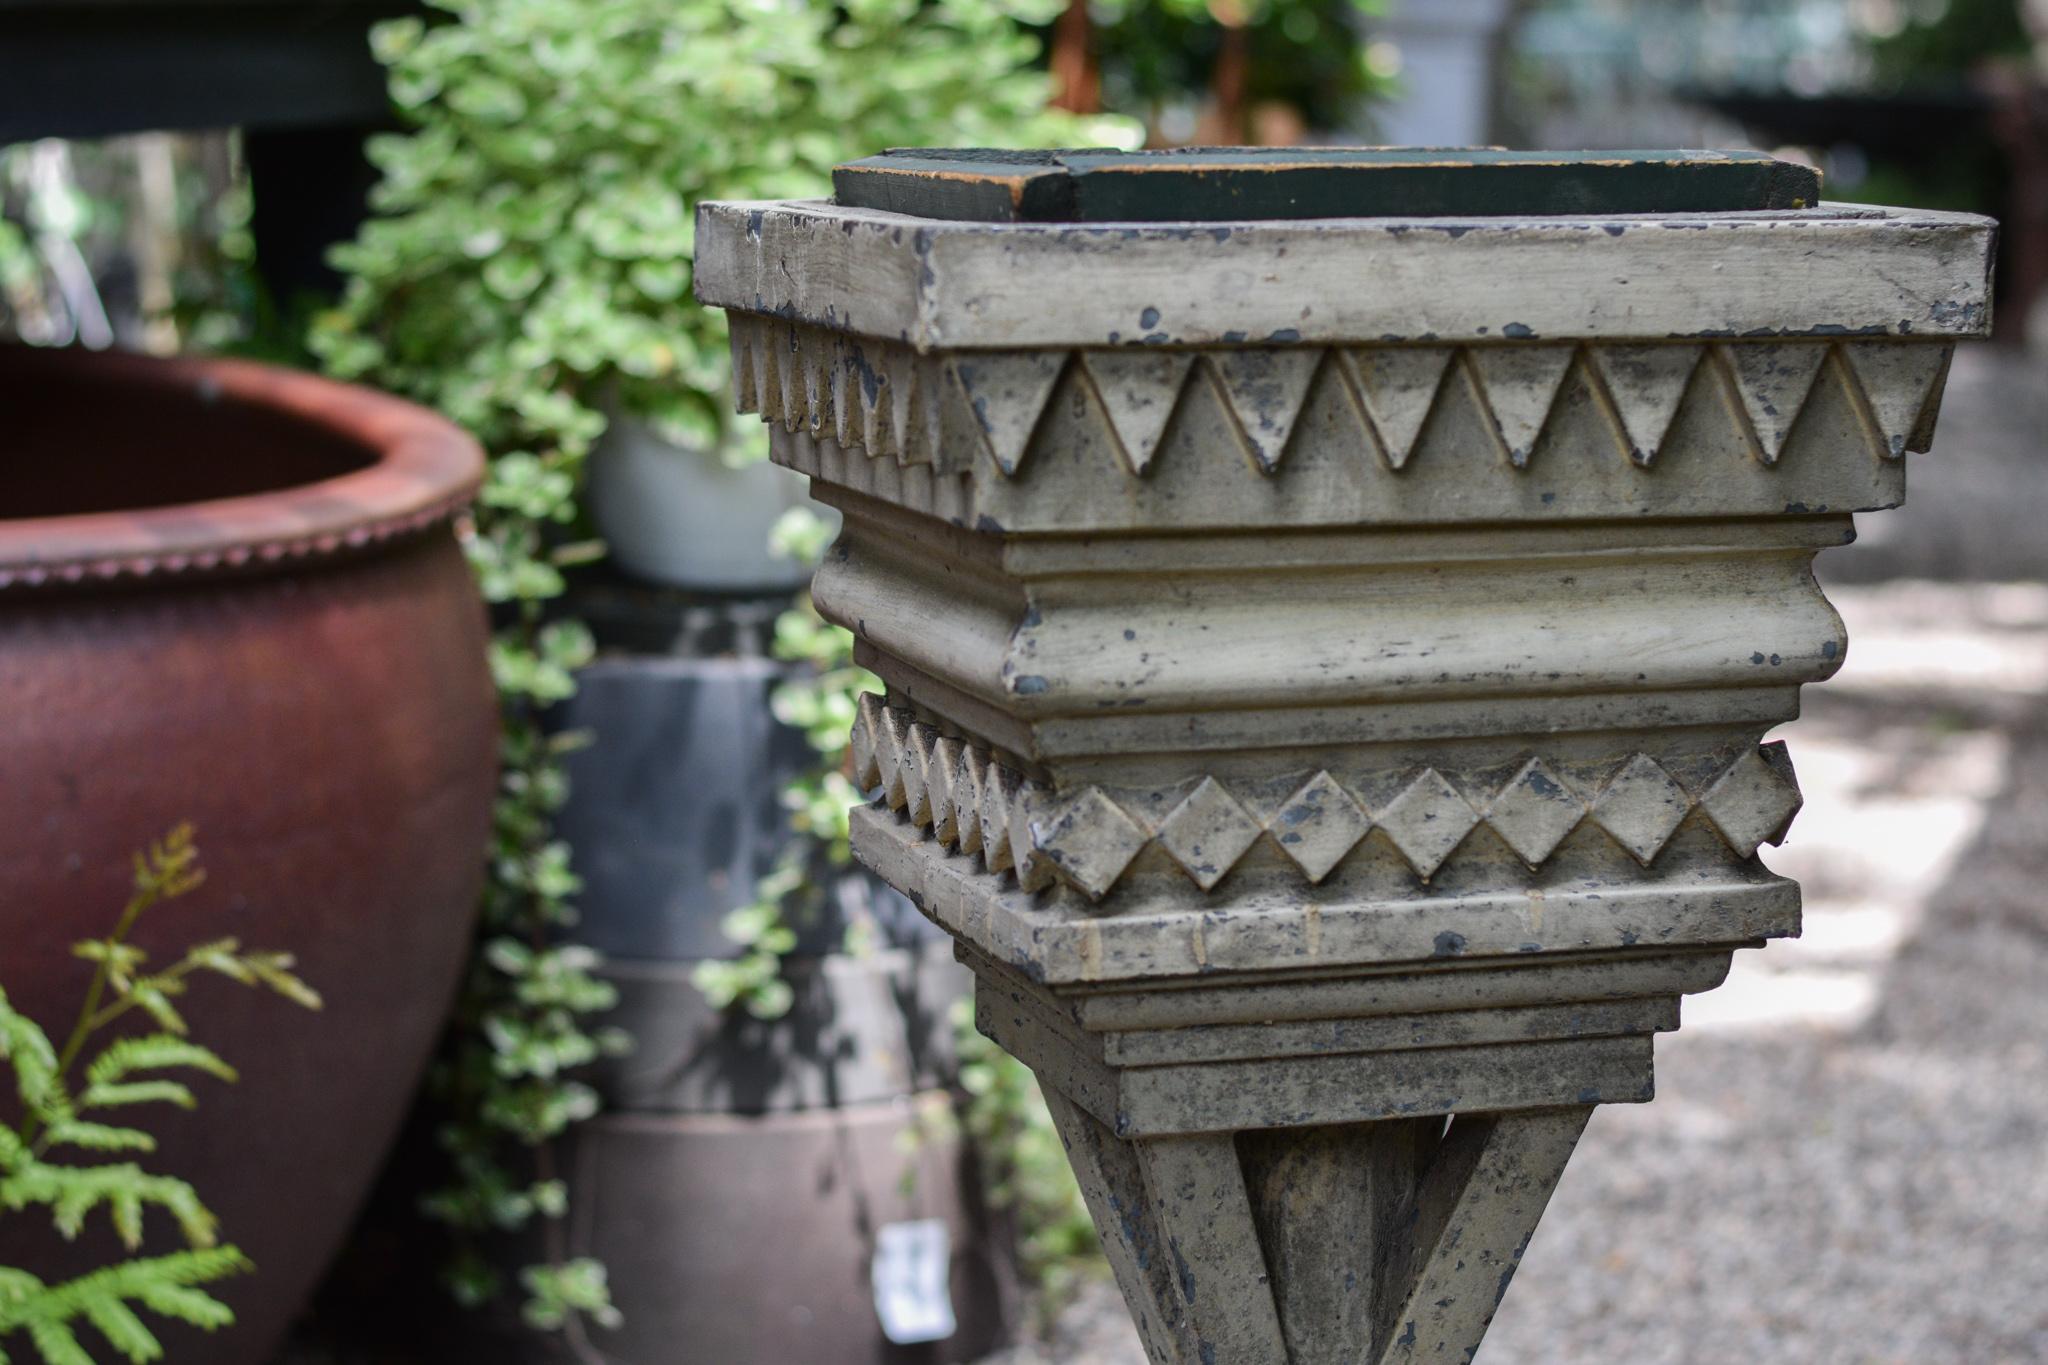 This fabulous zinc planter is a one of a kind find. This planter is a decadent treasure from a movement where aesthetics were the primary value in art and design. These precedences still ring true for this zinc planter with incredible balance,